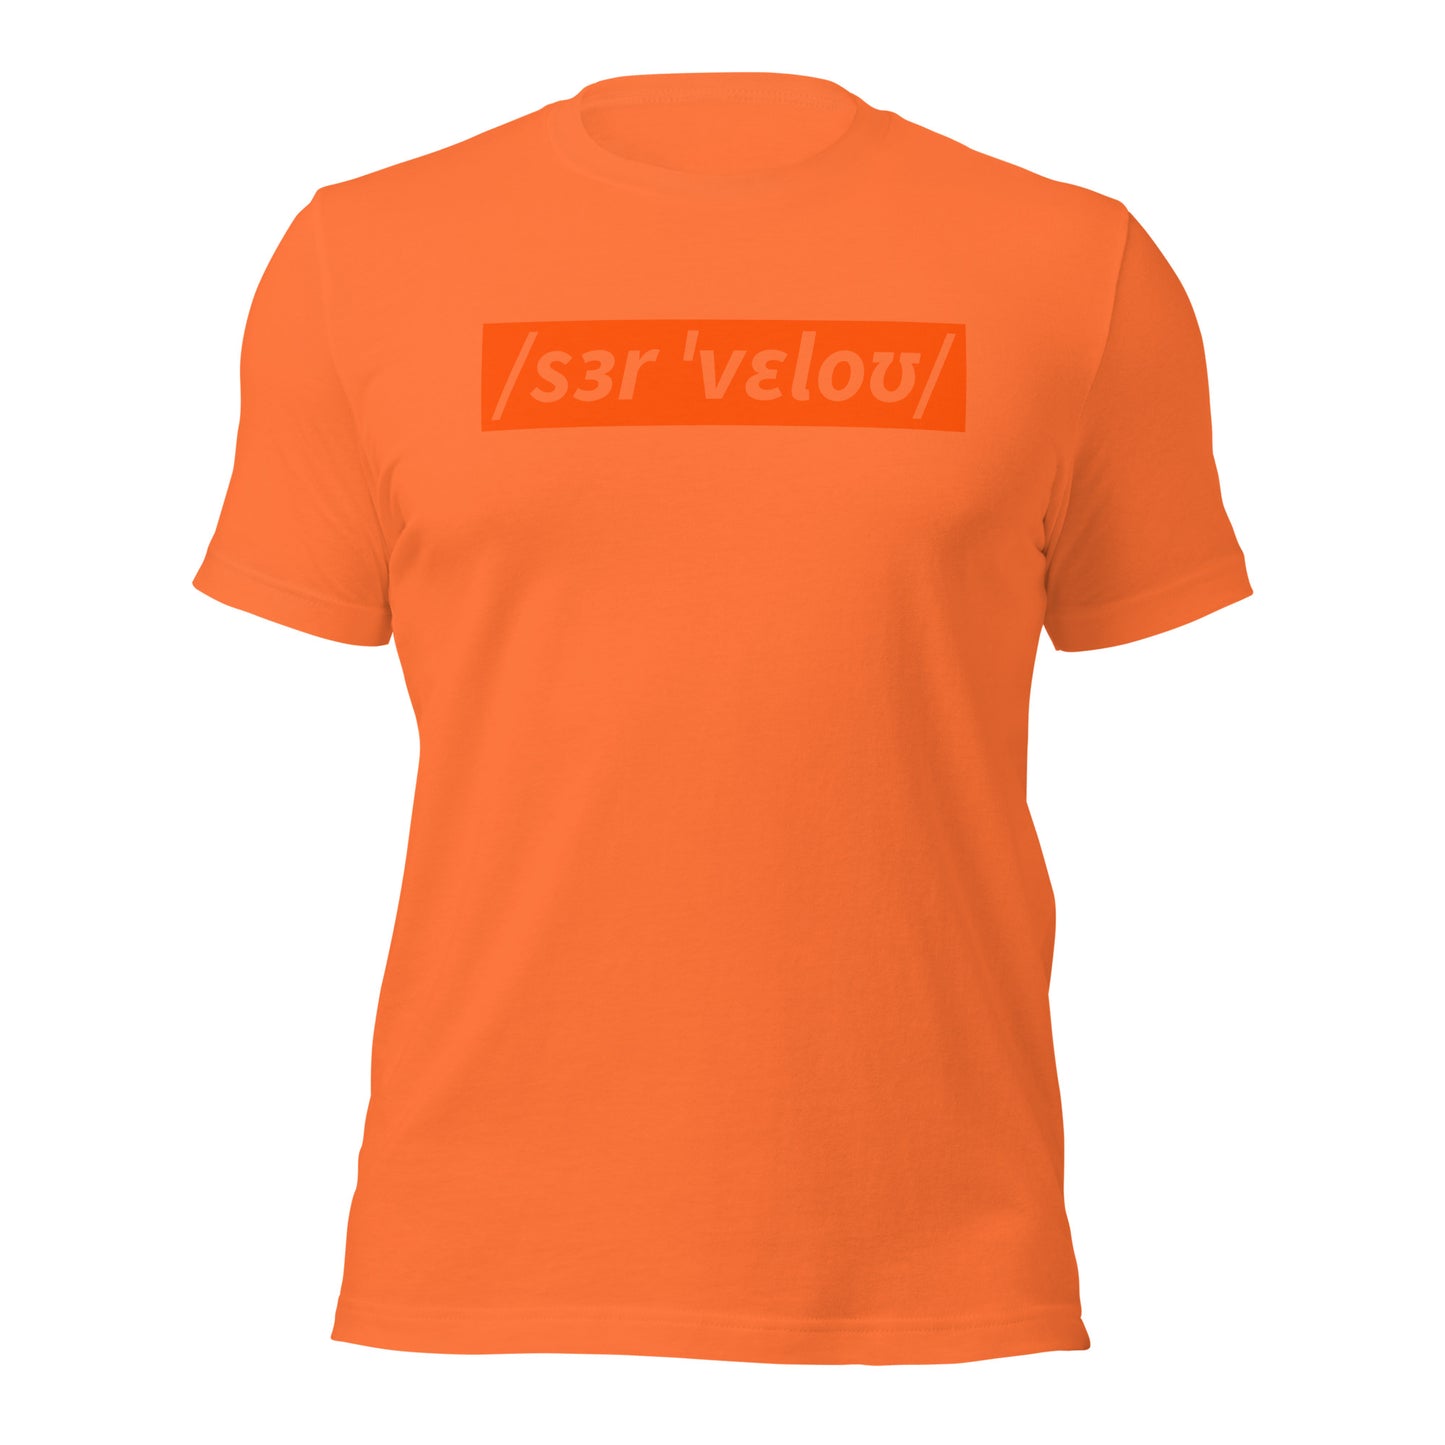 Sir Velo Bicycle T-Shirt, Adult Cyclist, Phonetic Spelling